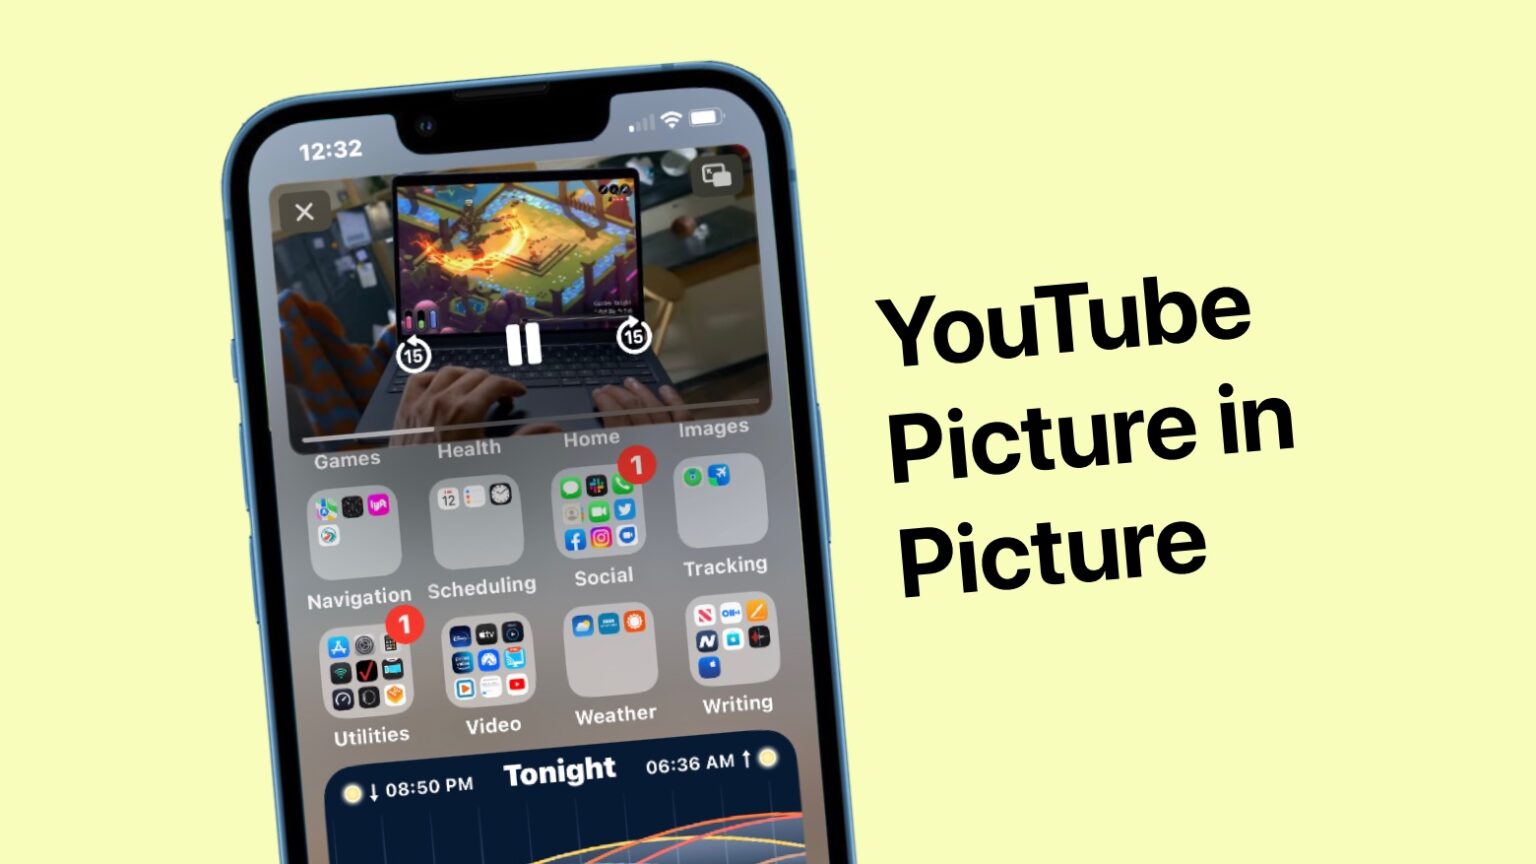 YouTube picture-in-picture finally rolls out for all iPhone users